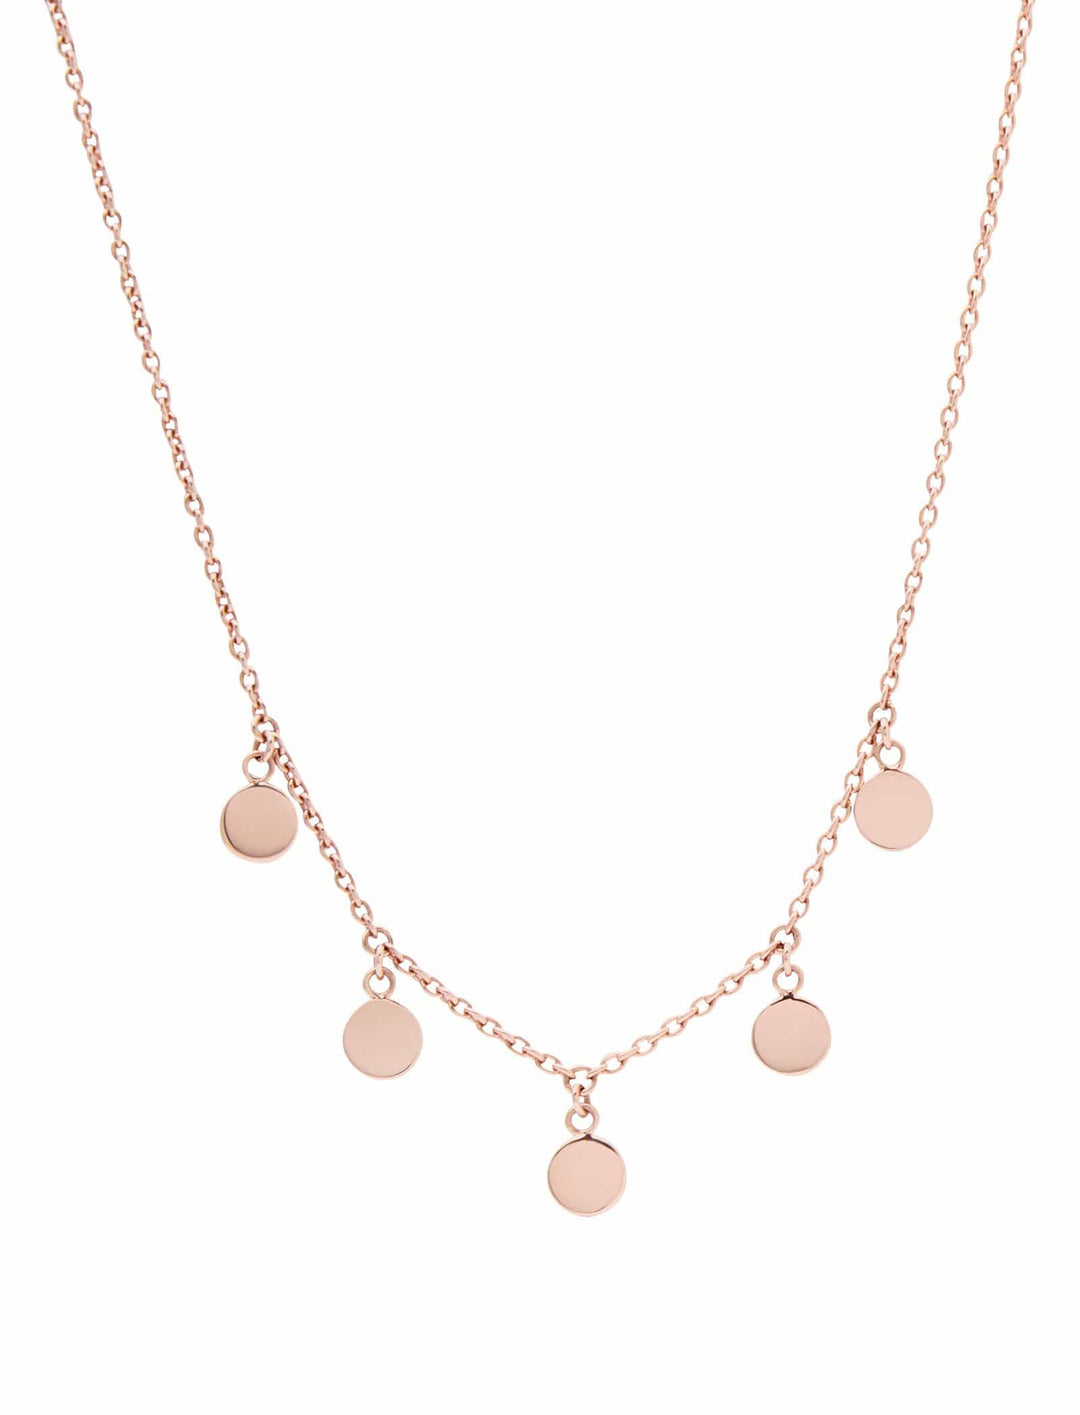 Gypsy Moon Necklace- Rose Gold